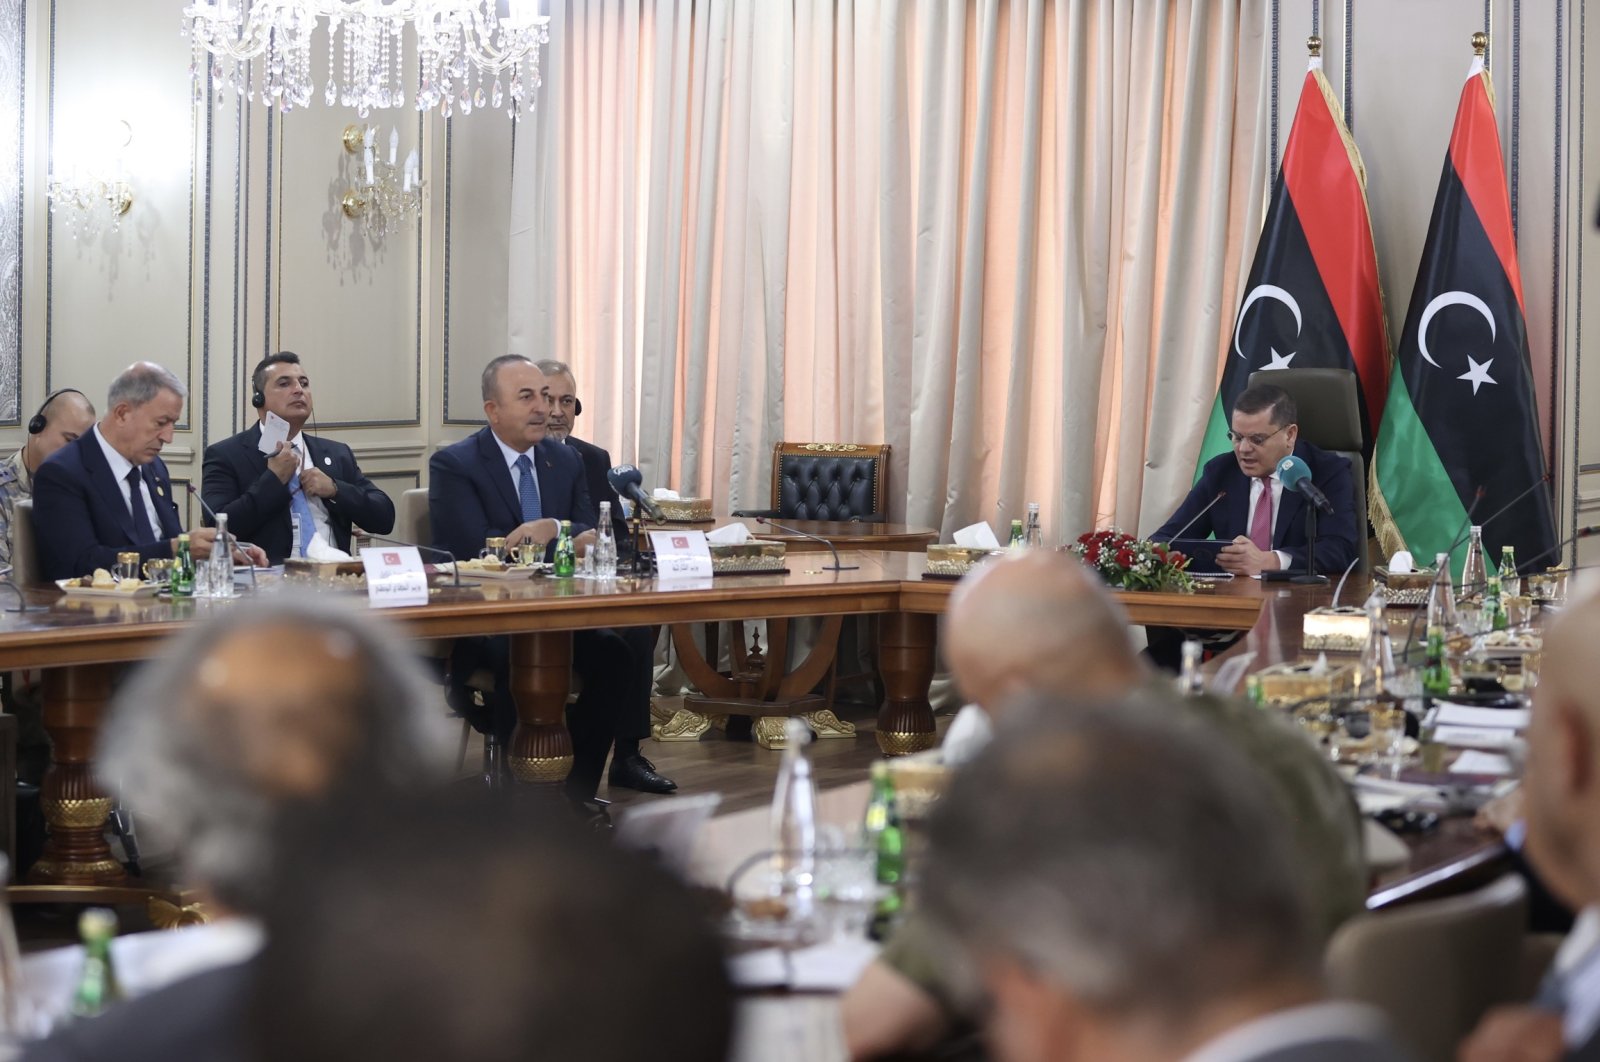 The leader of the Tripoli-based unity government and Prime Minister Abdul Hamid Mohammed Dbeibah (R) during a meeting with high-level Turkish delegation including Foreign Minister Mevlüt Çavuşoğlu (2nd L) and Defense Minister Hulusi Akar (L), in the capital Tripoli, Libya, Oct. 3, 2022. (AA Photo)